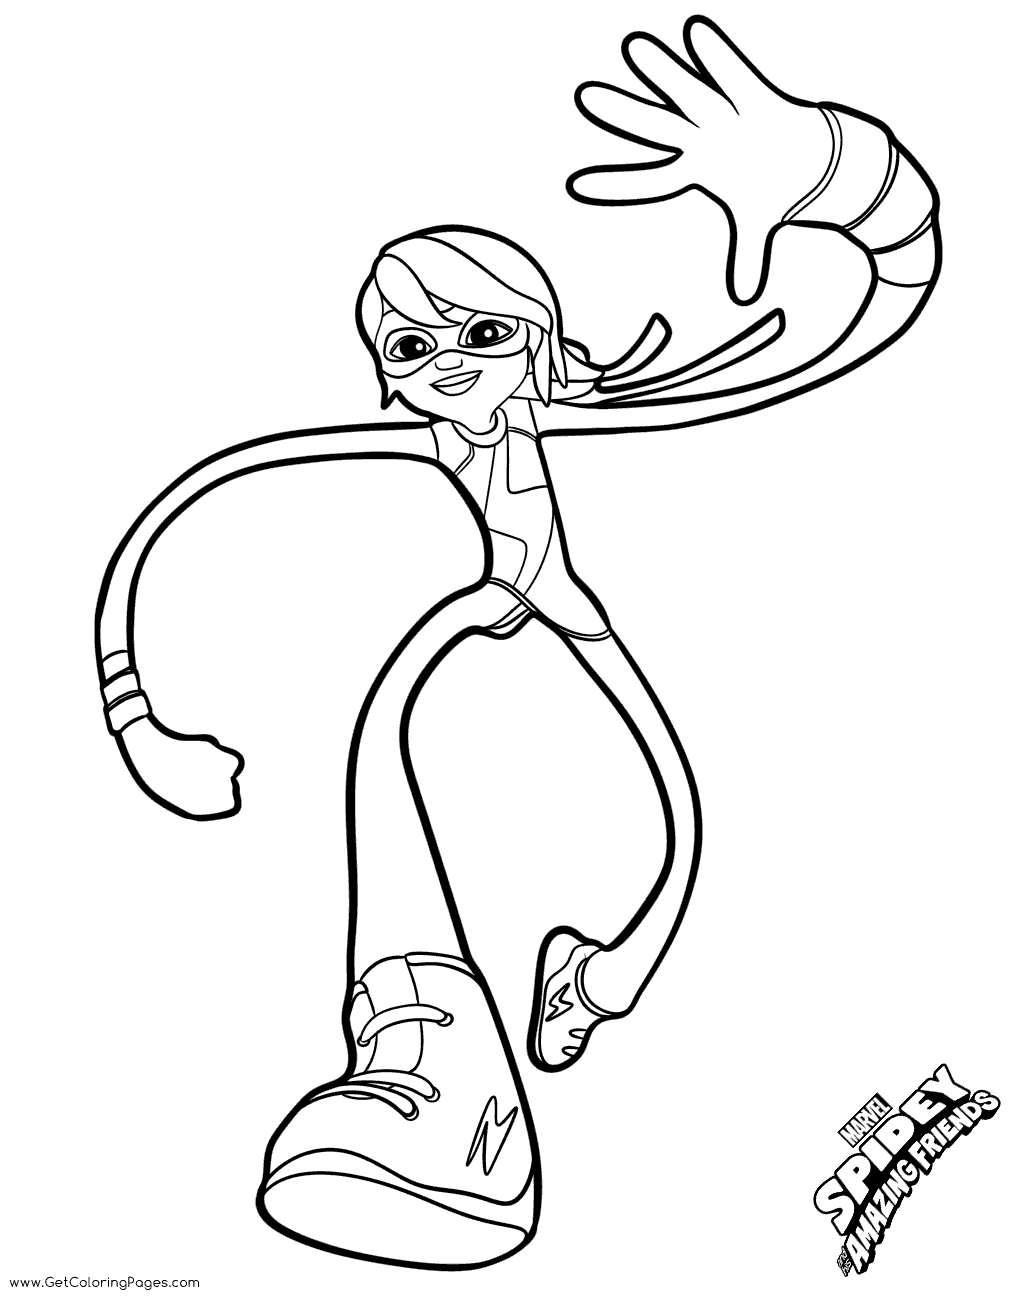 Doctor Octopus Carolyn Trainer Coloring Pages - Get Coloring Pages